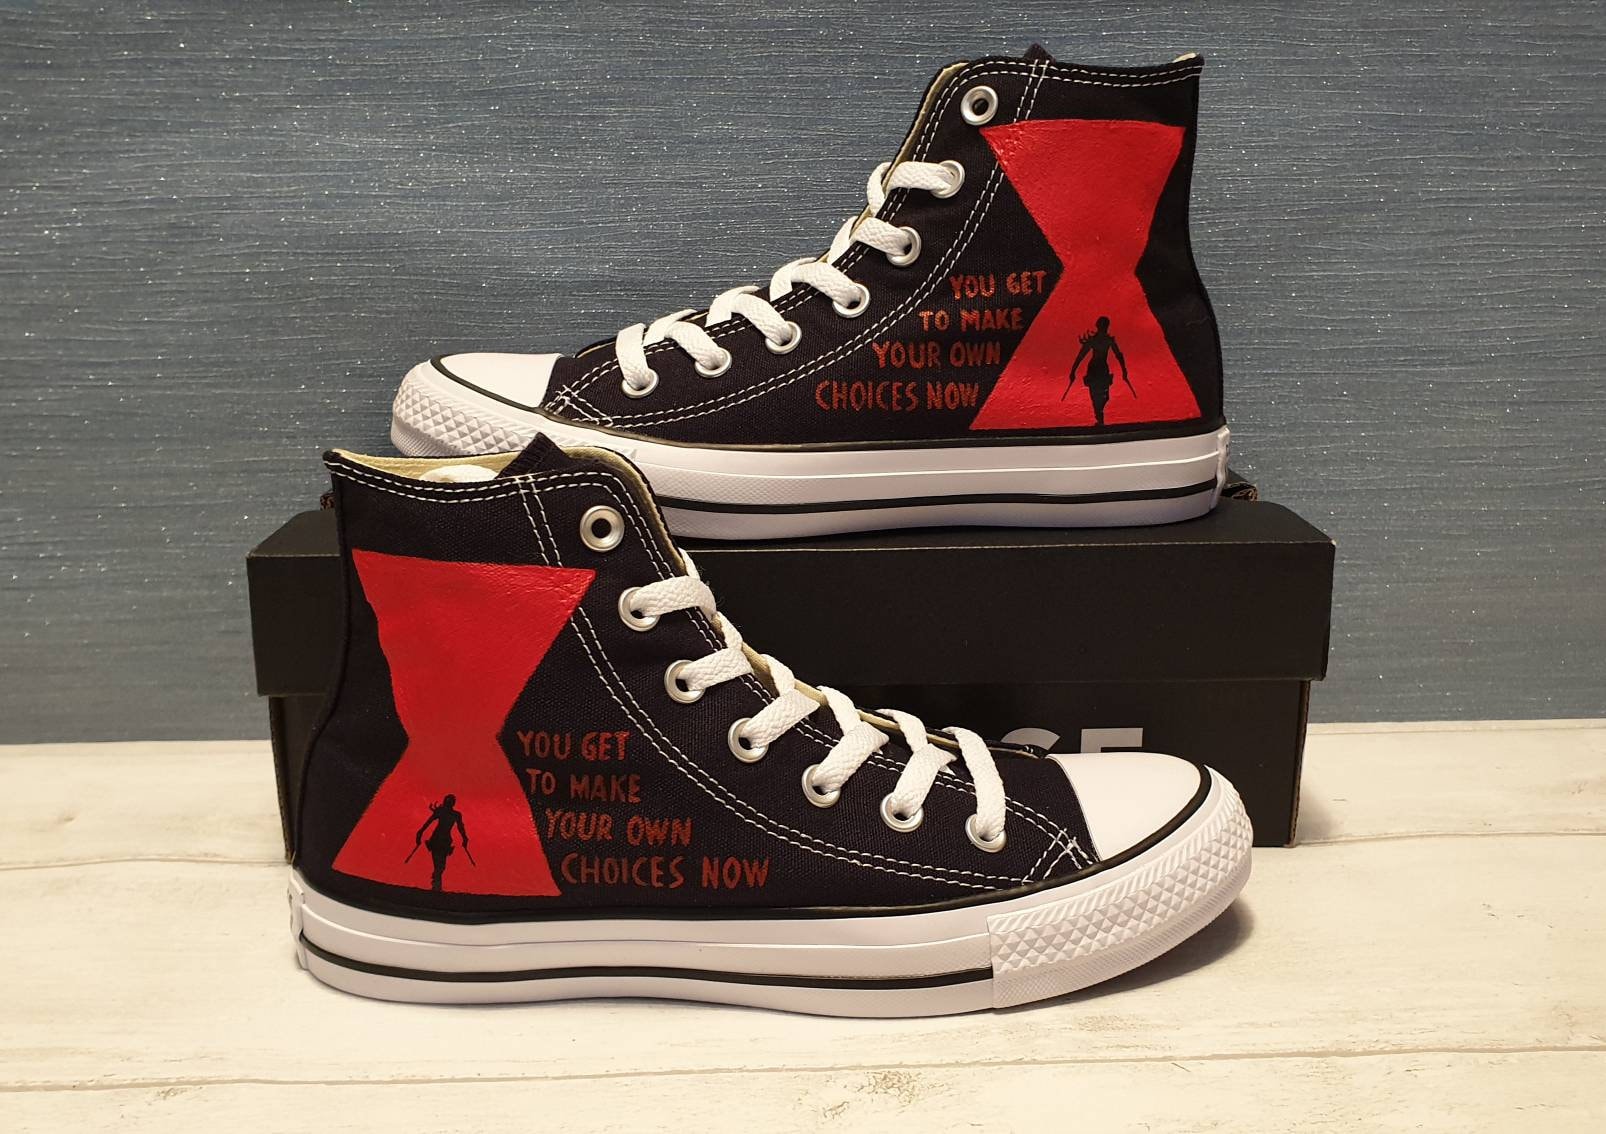 Converse Branded Custom Hand Painted Shoes Marvels Black Widow - Etsy